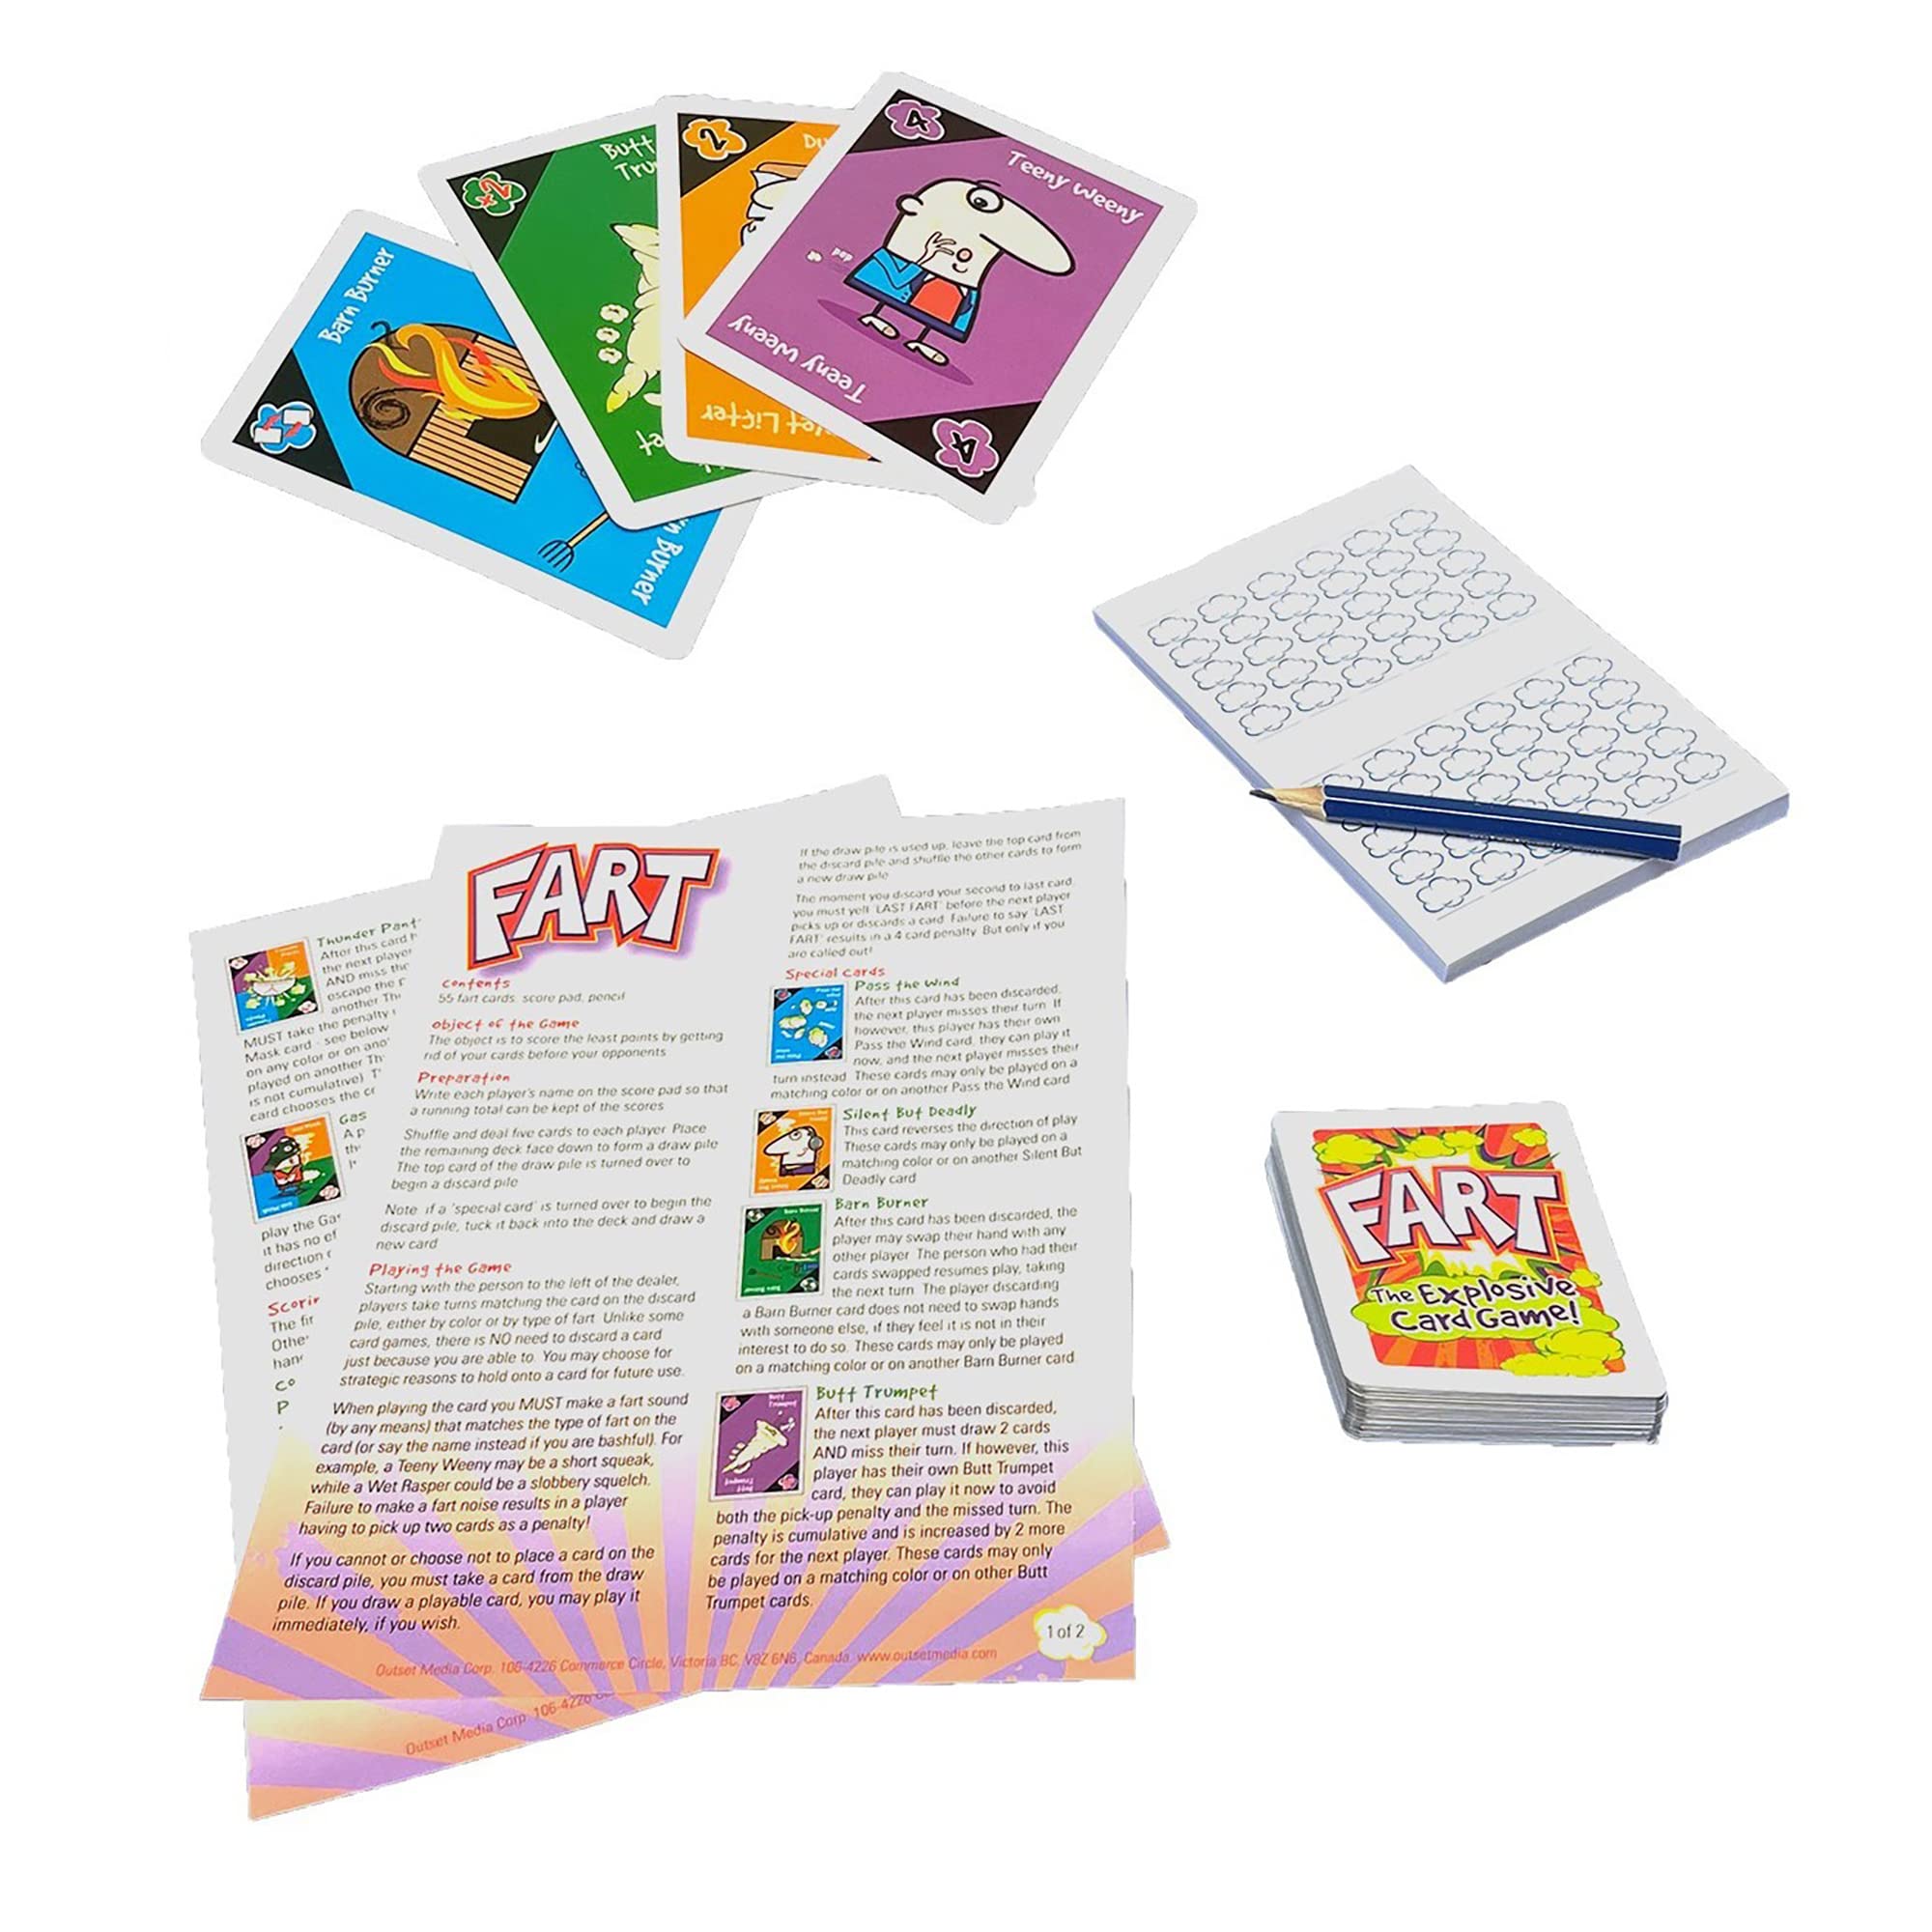 Fart - The Explosive Card Game - Easy to Learn Fast Flatulent Fun, Kids Family & Friends Party Game, Funny Fast Acting, Toilet Humor, Outset Media, Ages 8+, 3+ Players